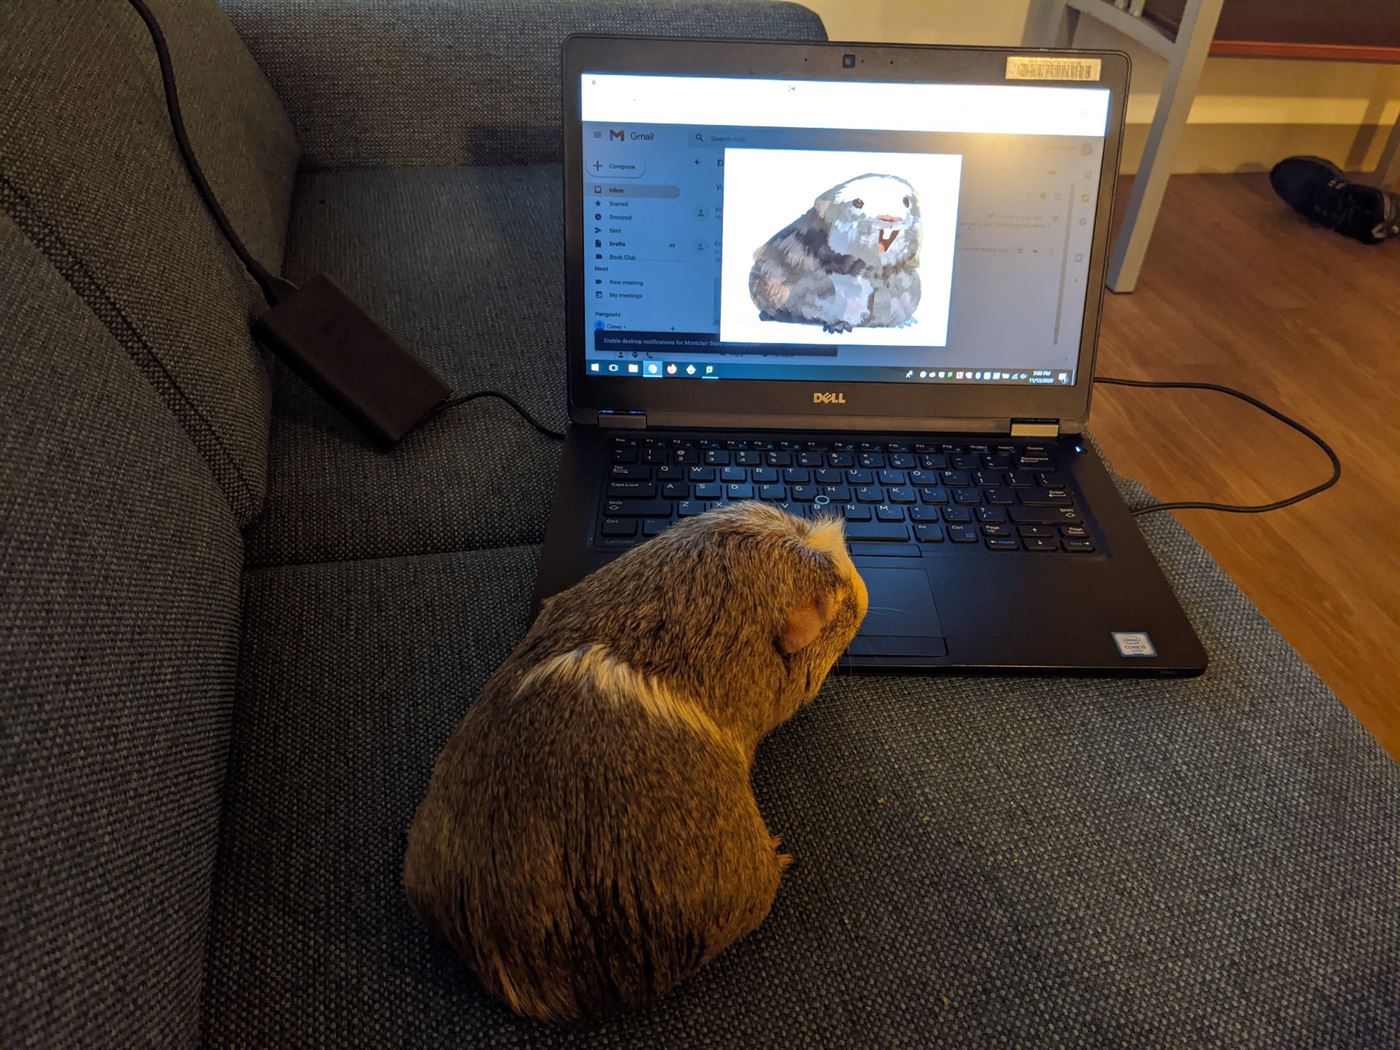 Wicket enjoys the gif of himself on my rental laptop. Casey Masterson | The Montclarion